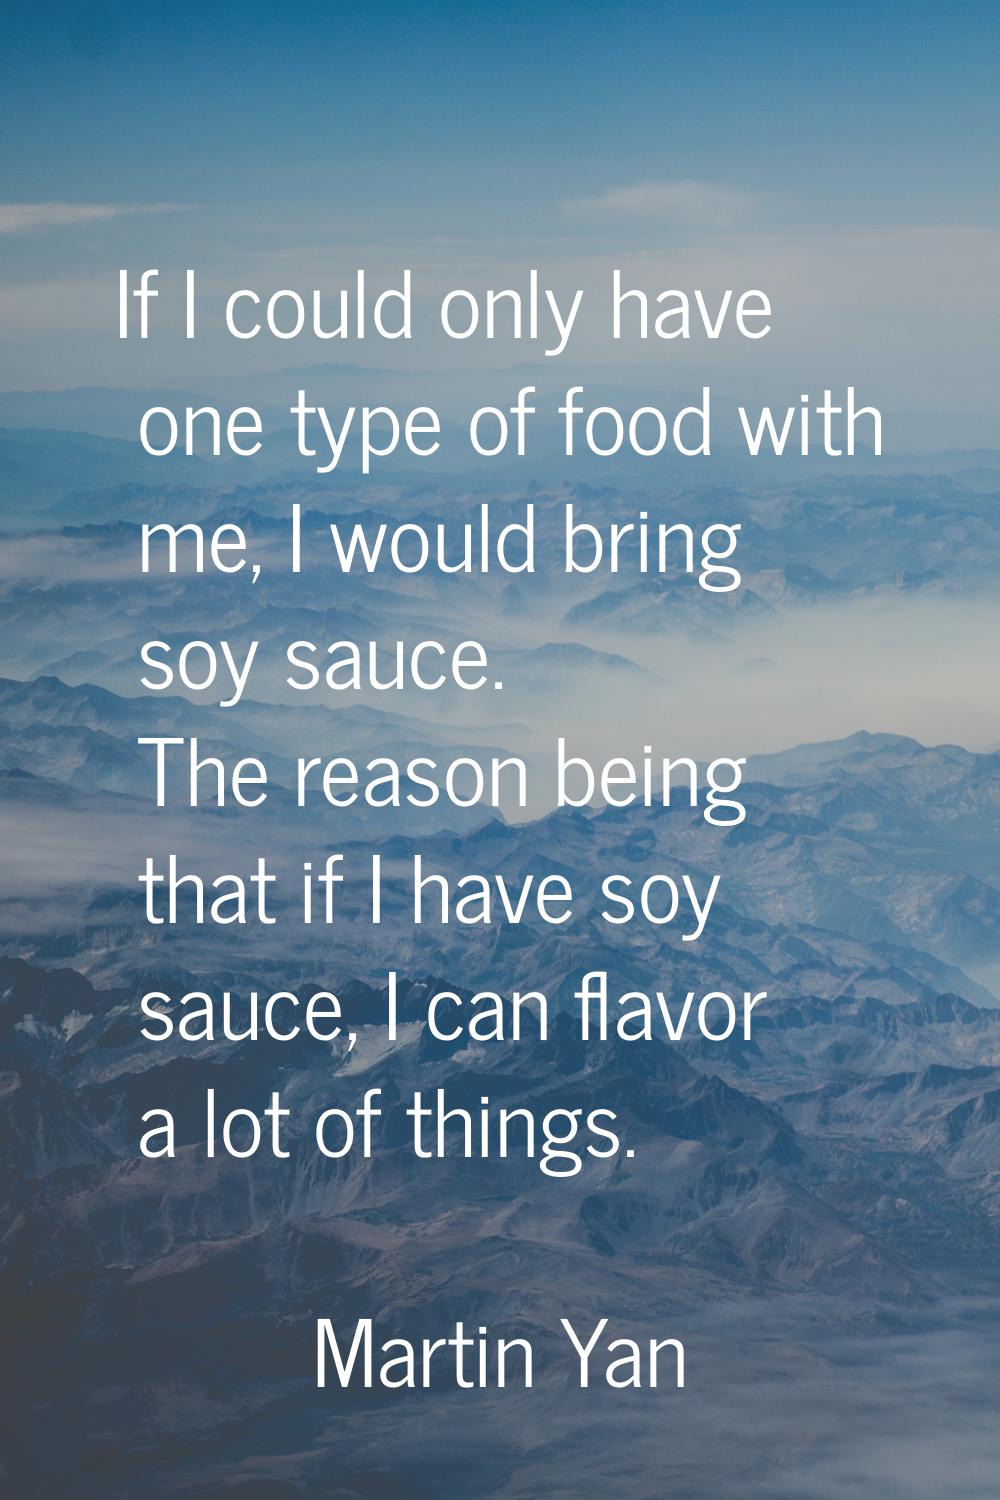 If I could only have one type of food with me, I would bring soy sauce. The reason being that if I 